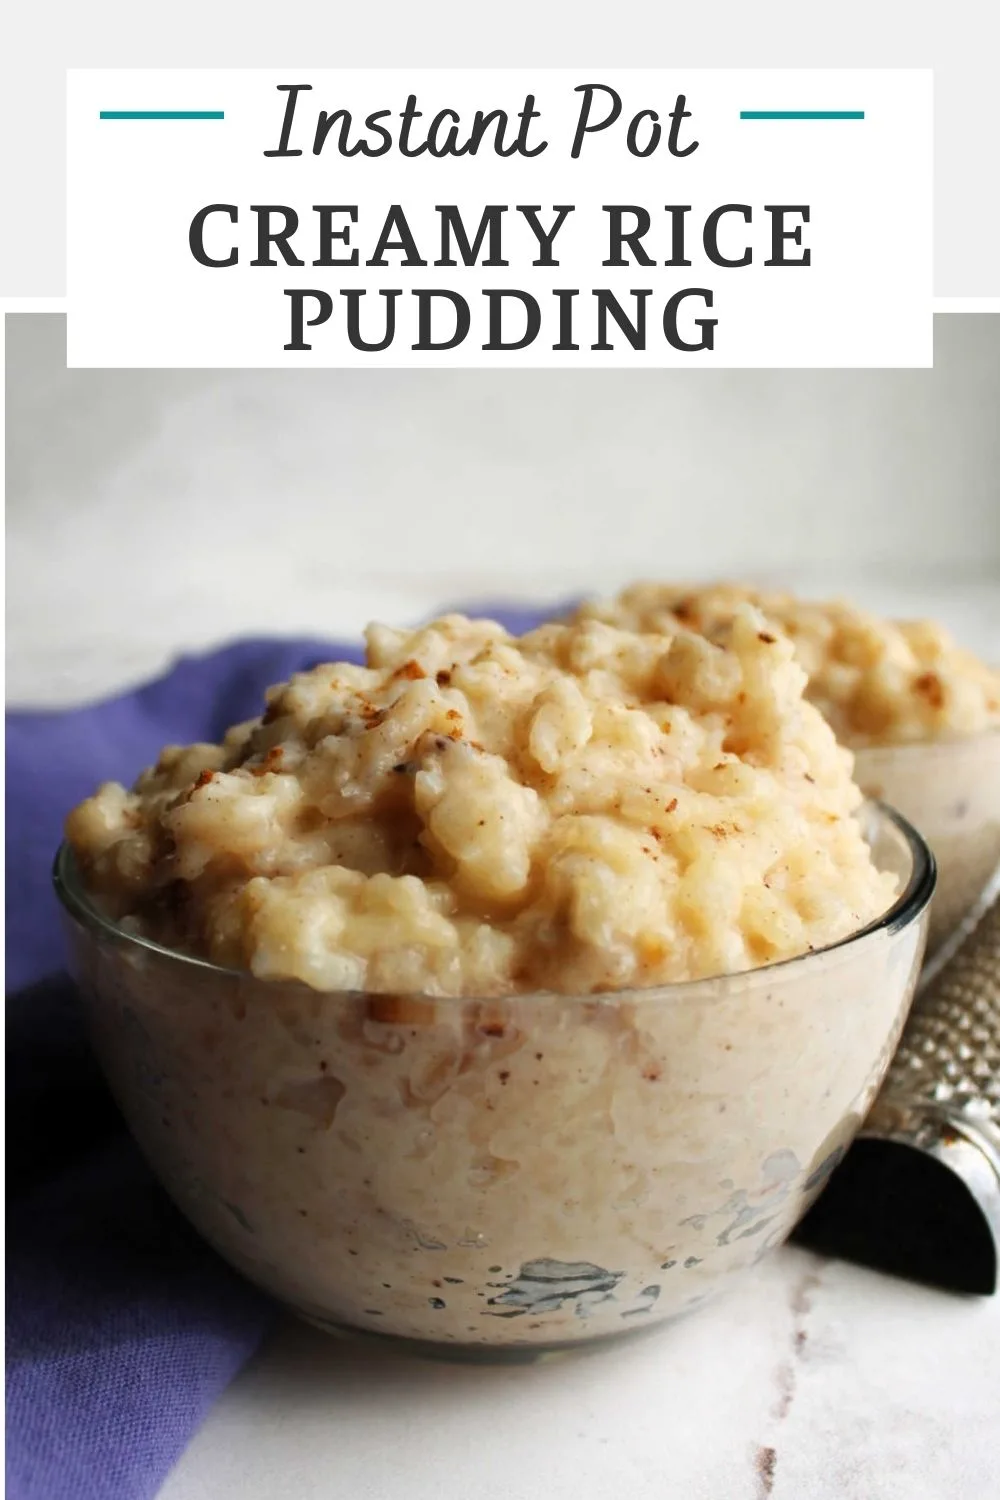 Make creamy rice pudding in the instant pot for a comforting sweet treat. This updated twist on the classic rice pudding is quick and easy to make but still has that old timey delicious dessert flavor.